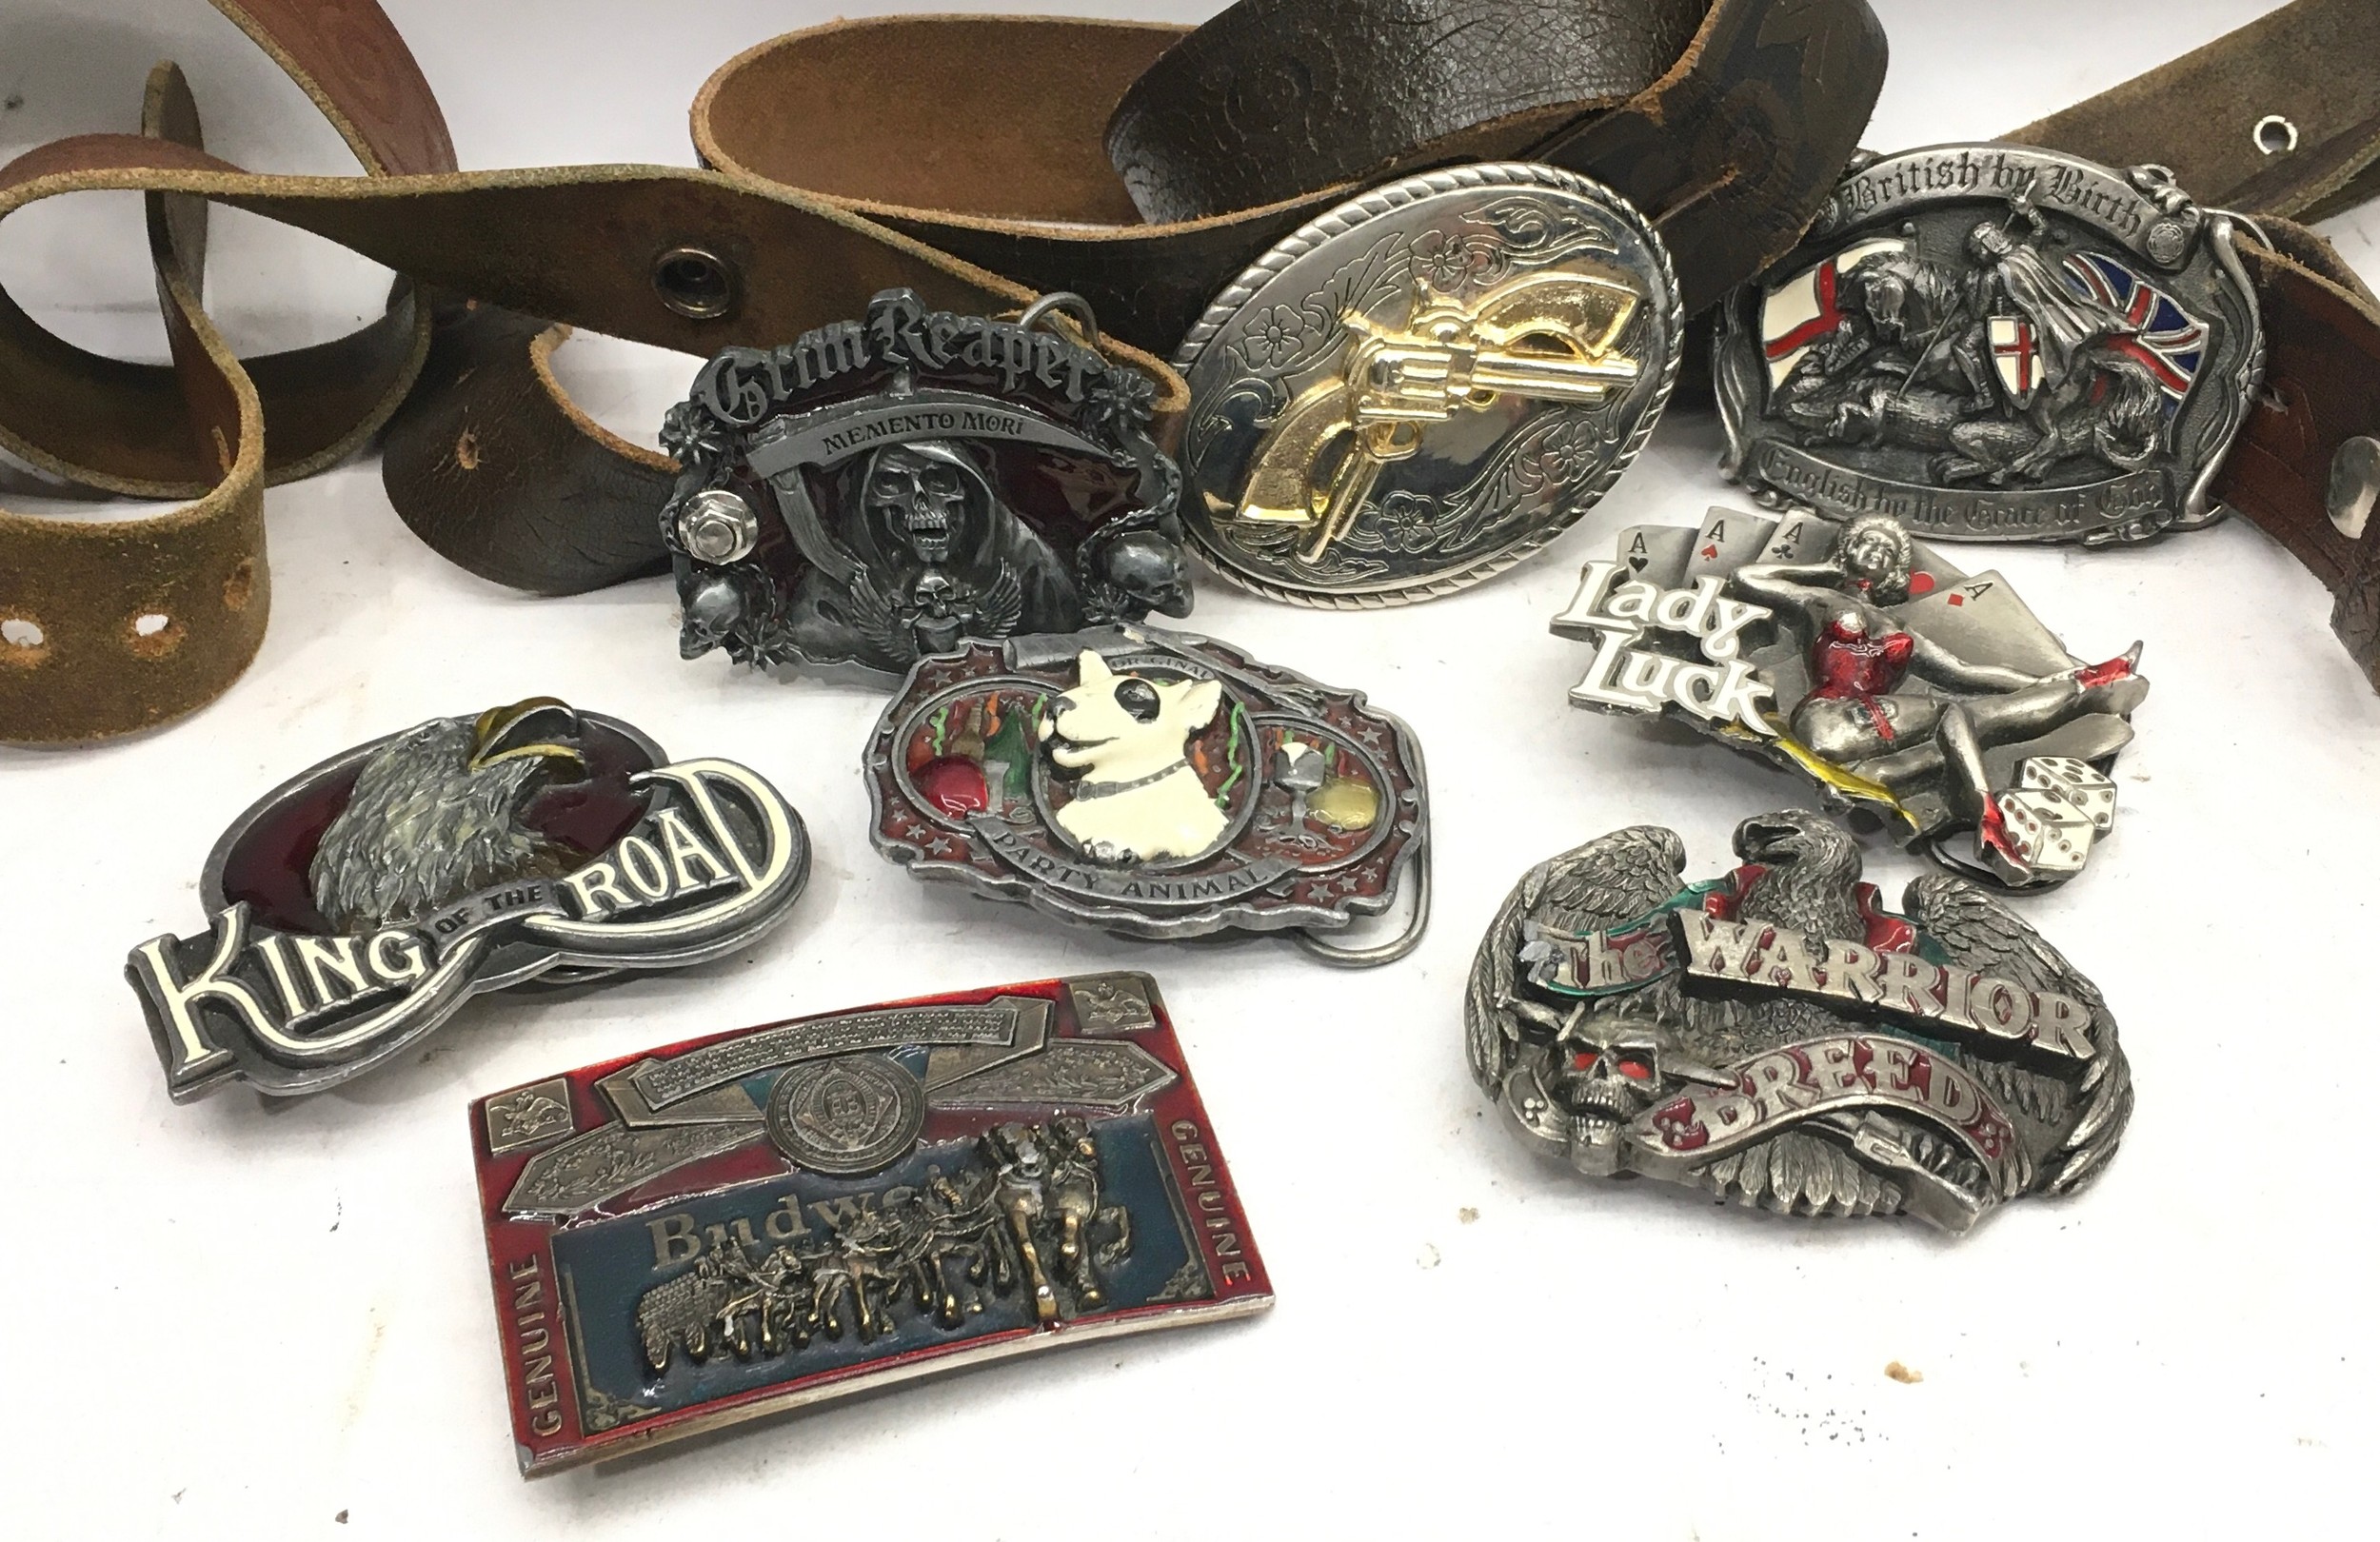 Quantity of leather belts and heavy cast metal belt buckles